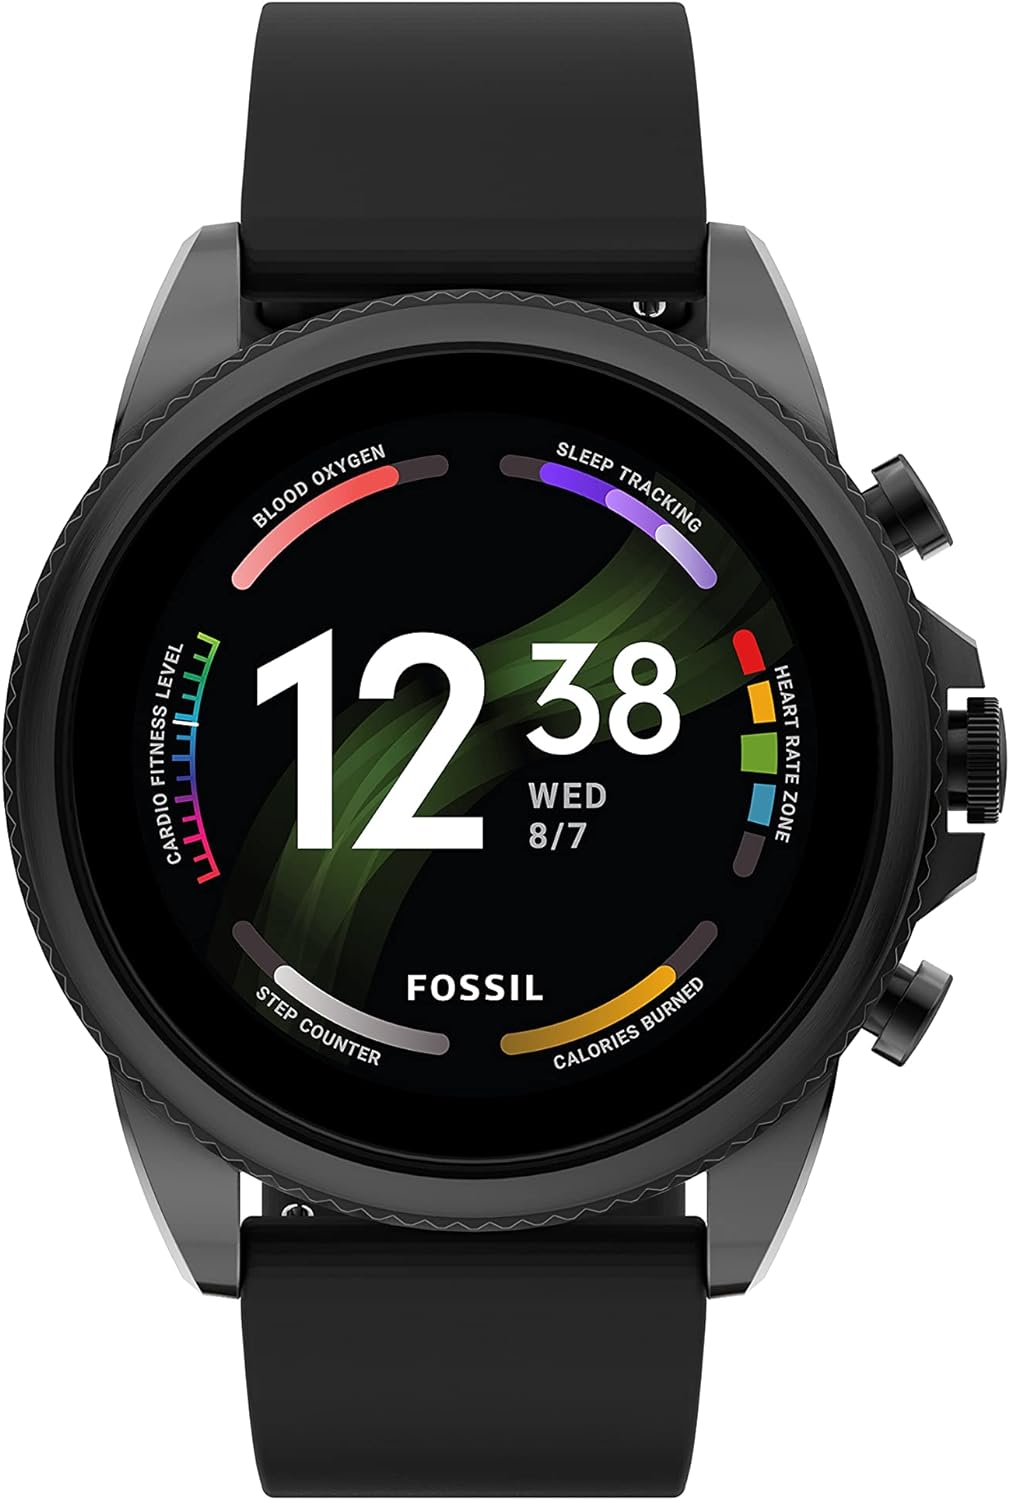 Fossil Gen 6 44mm NOW 37% OFF